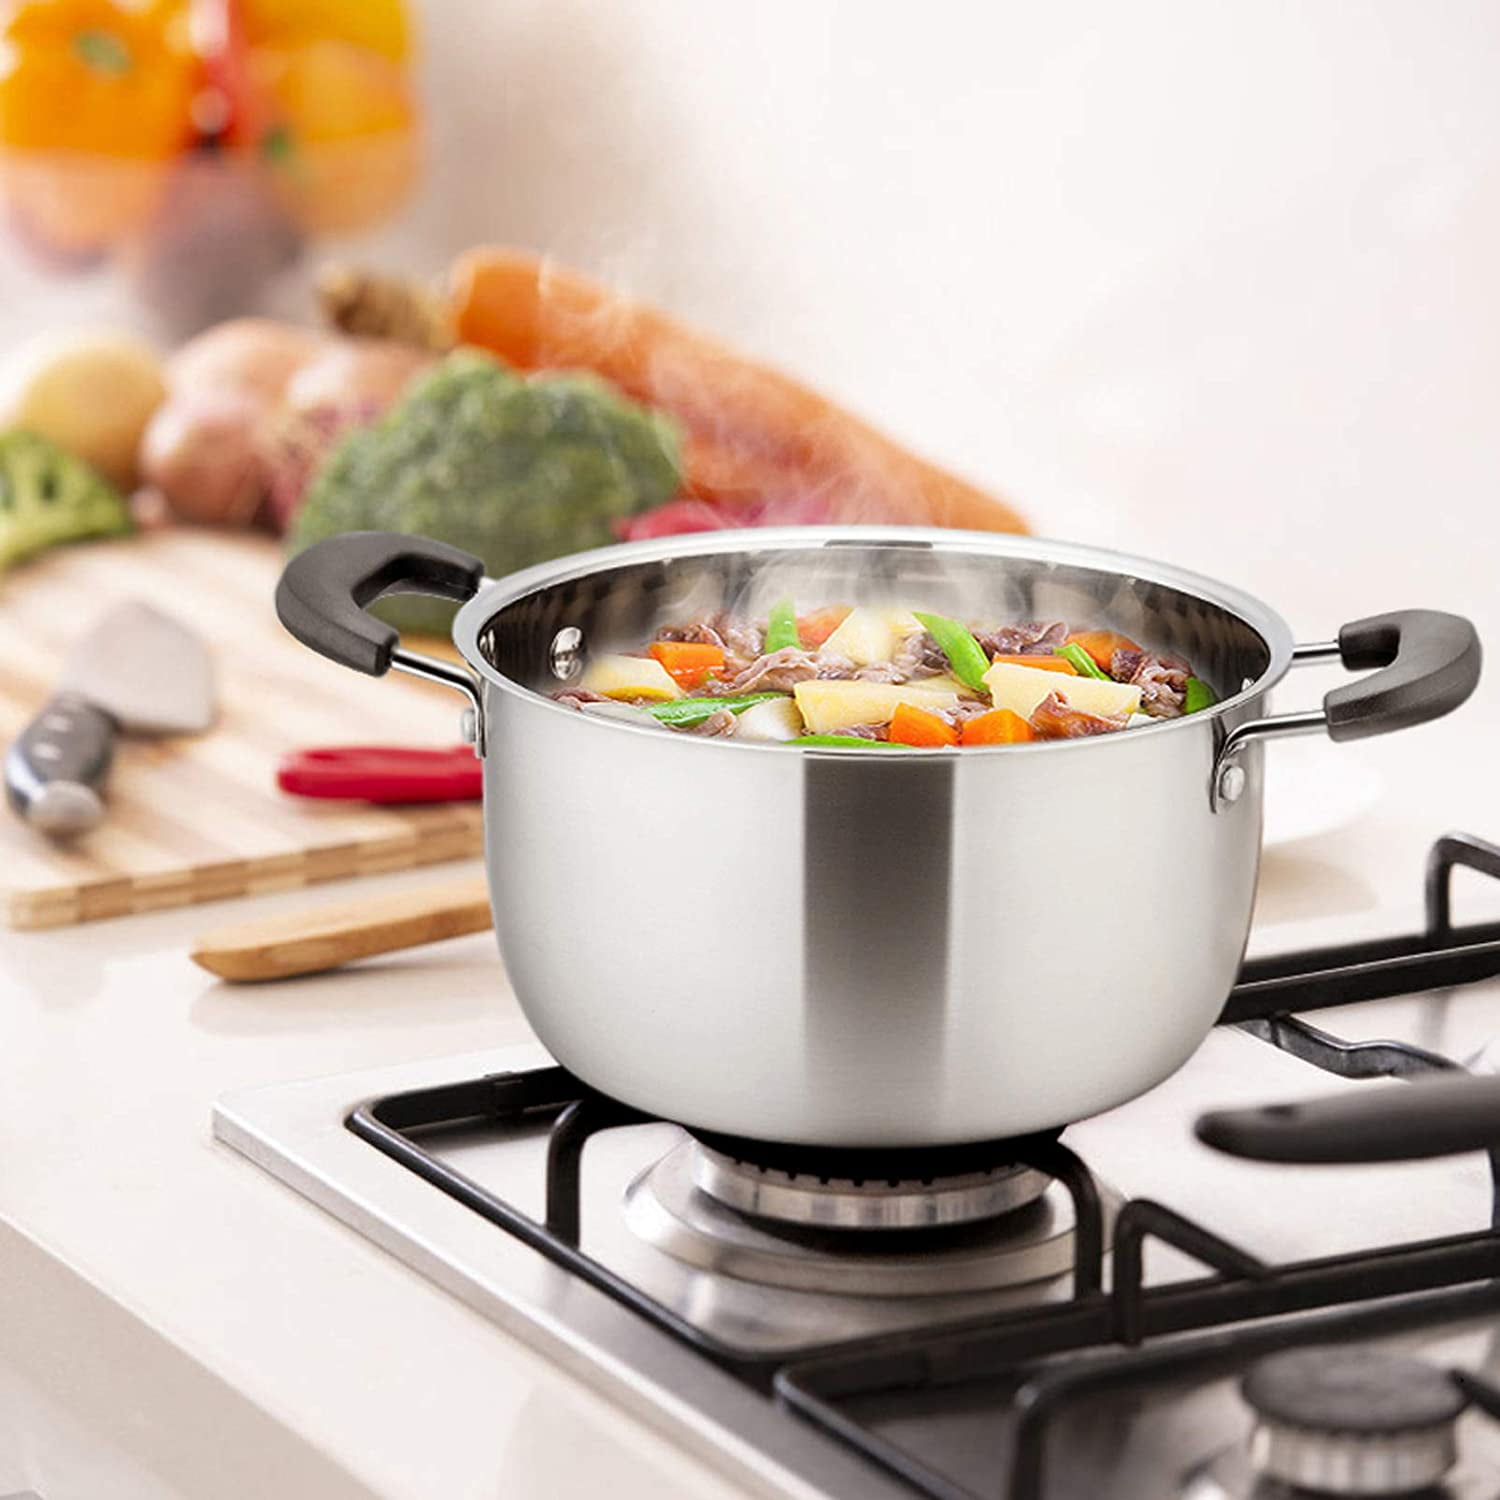 Large Stock Pot Stainless Steel Restaurant Restaurant Stockpot Cooking  w/Lid 35L